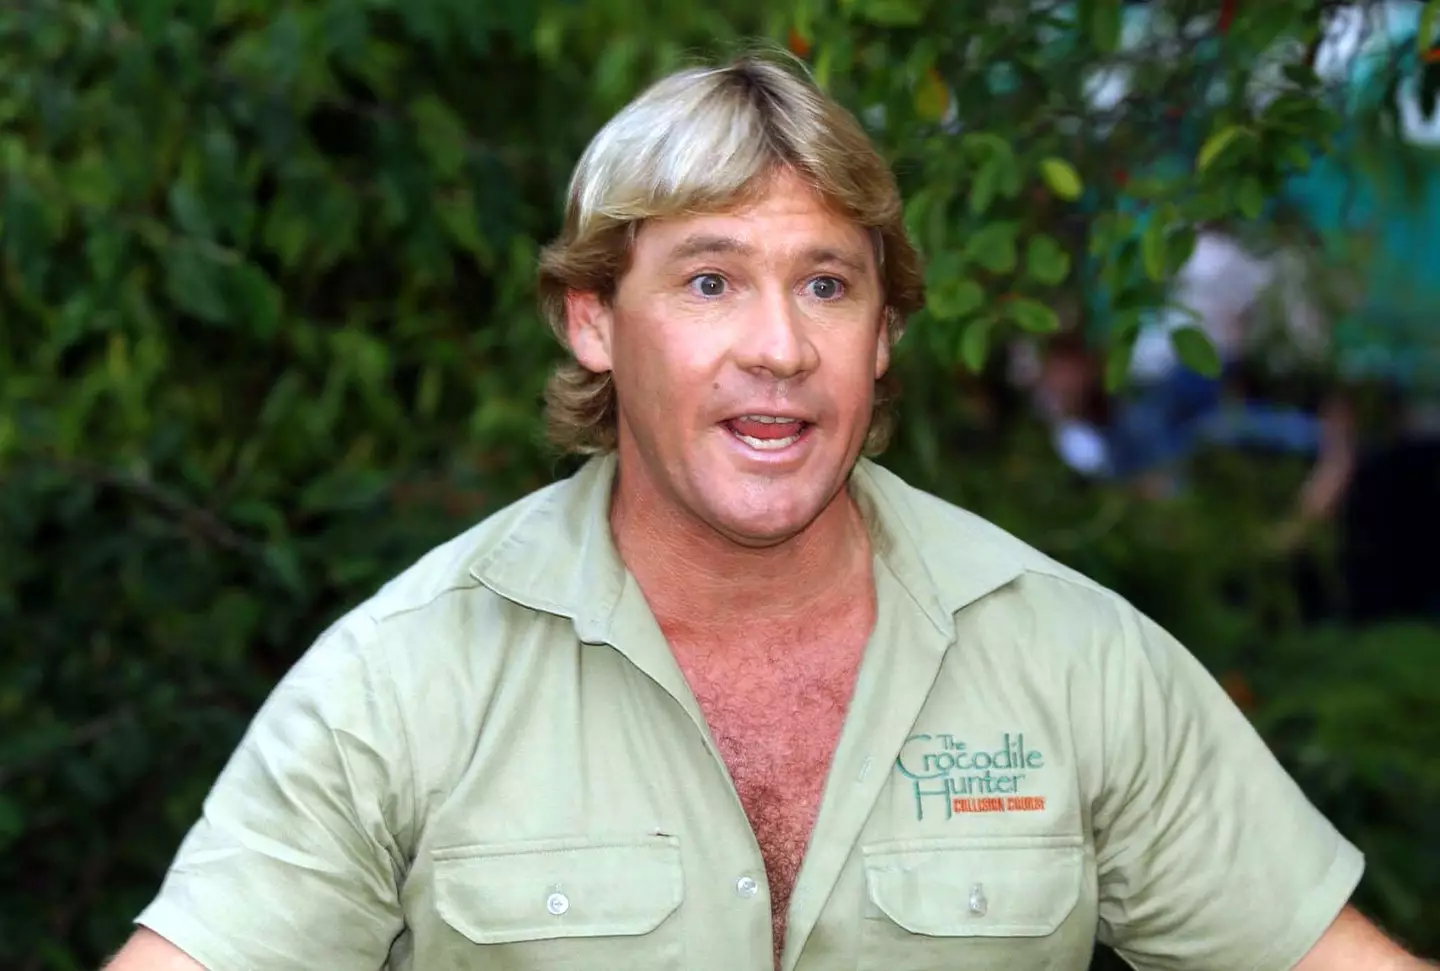 This year is the 16th anniversary of Steve Irwin's death.